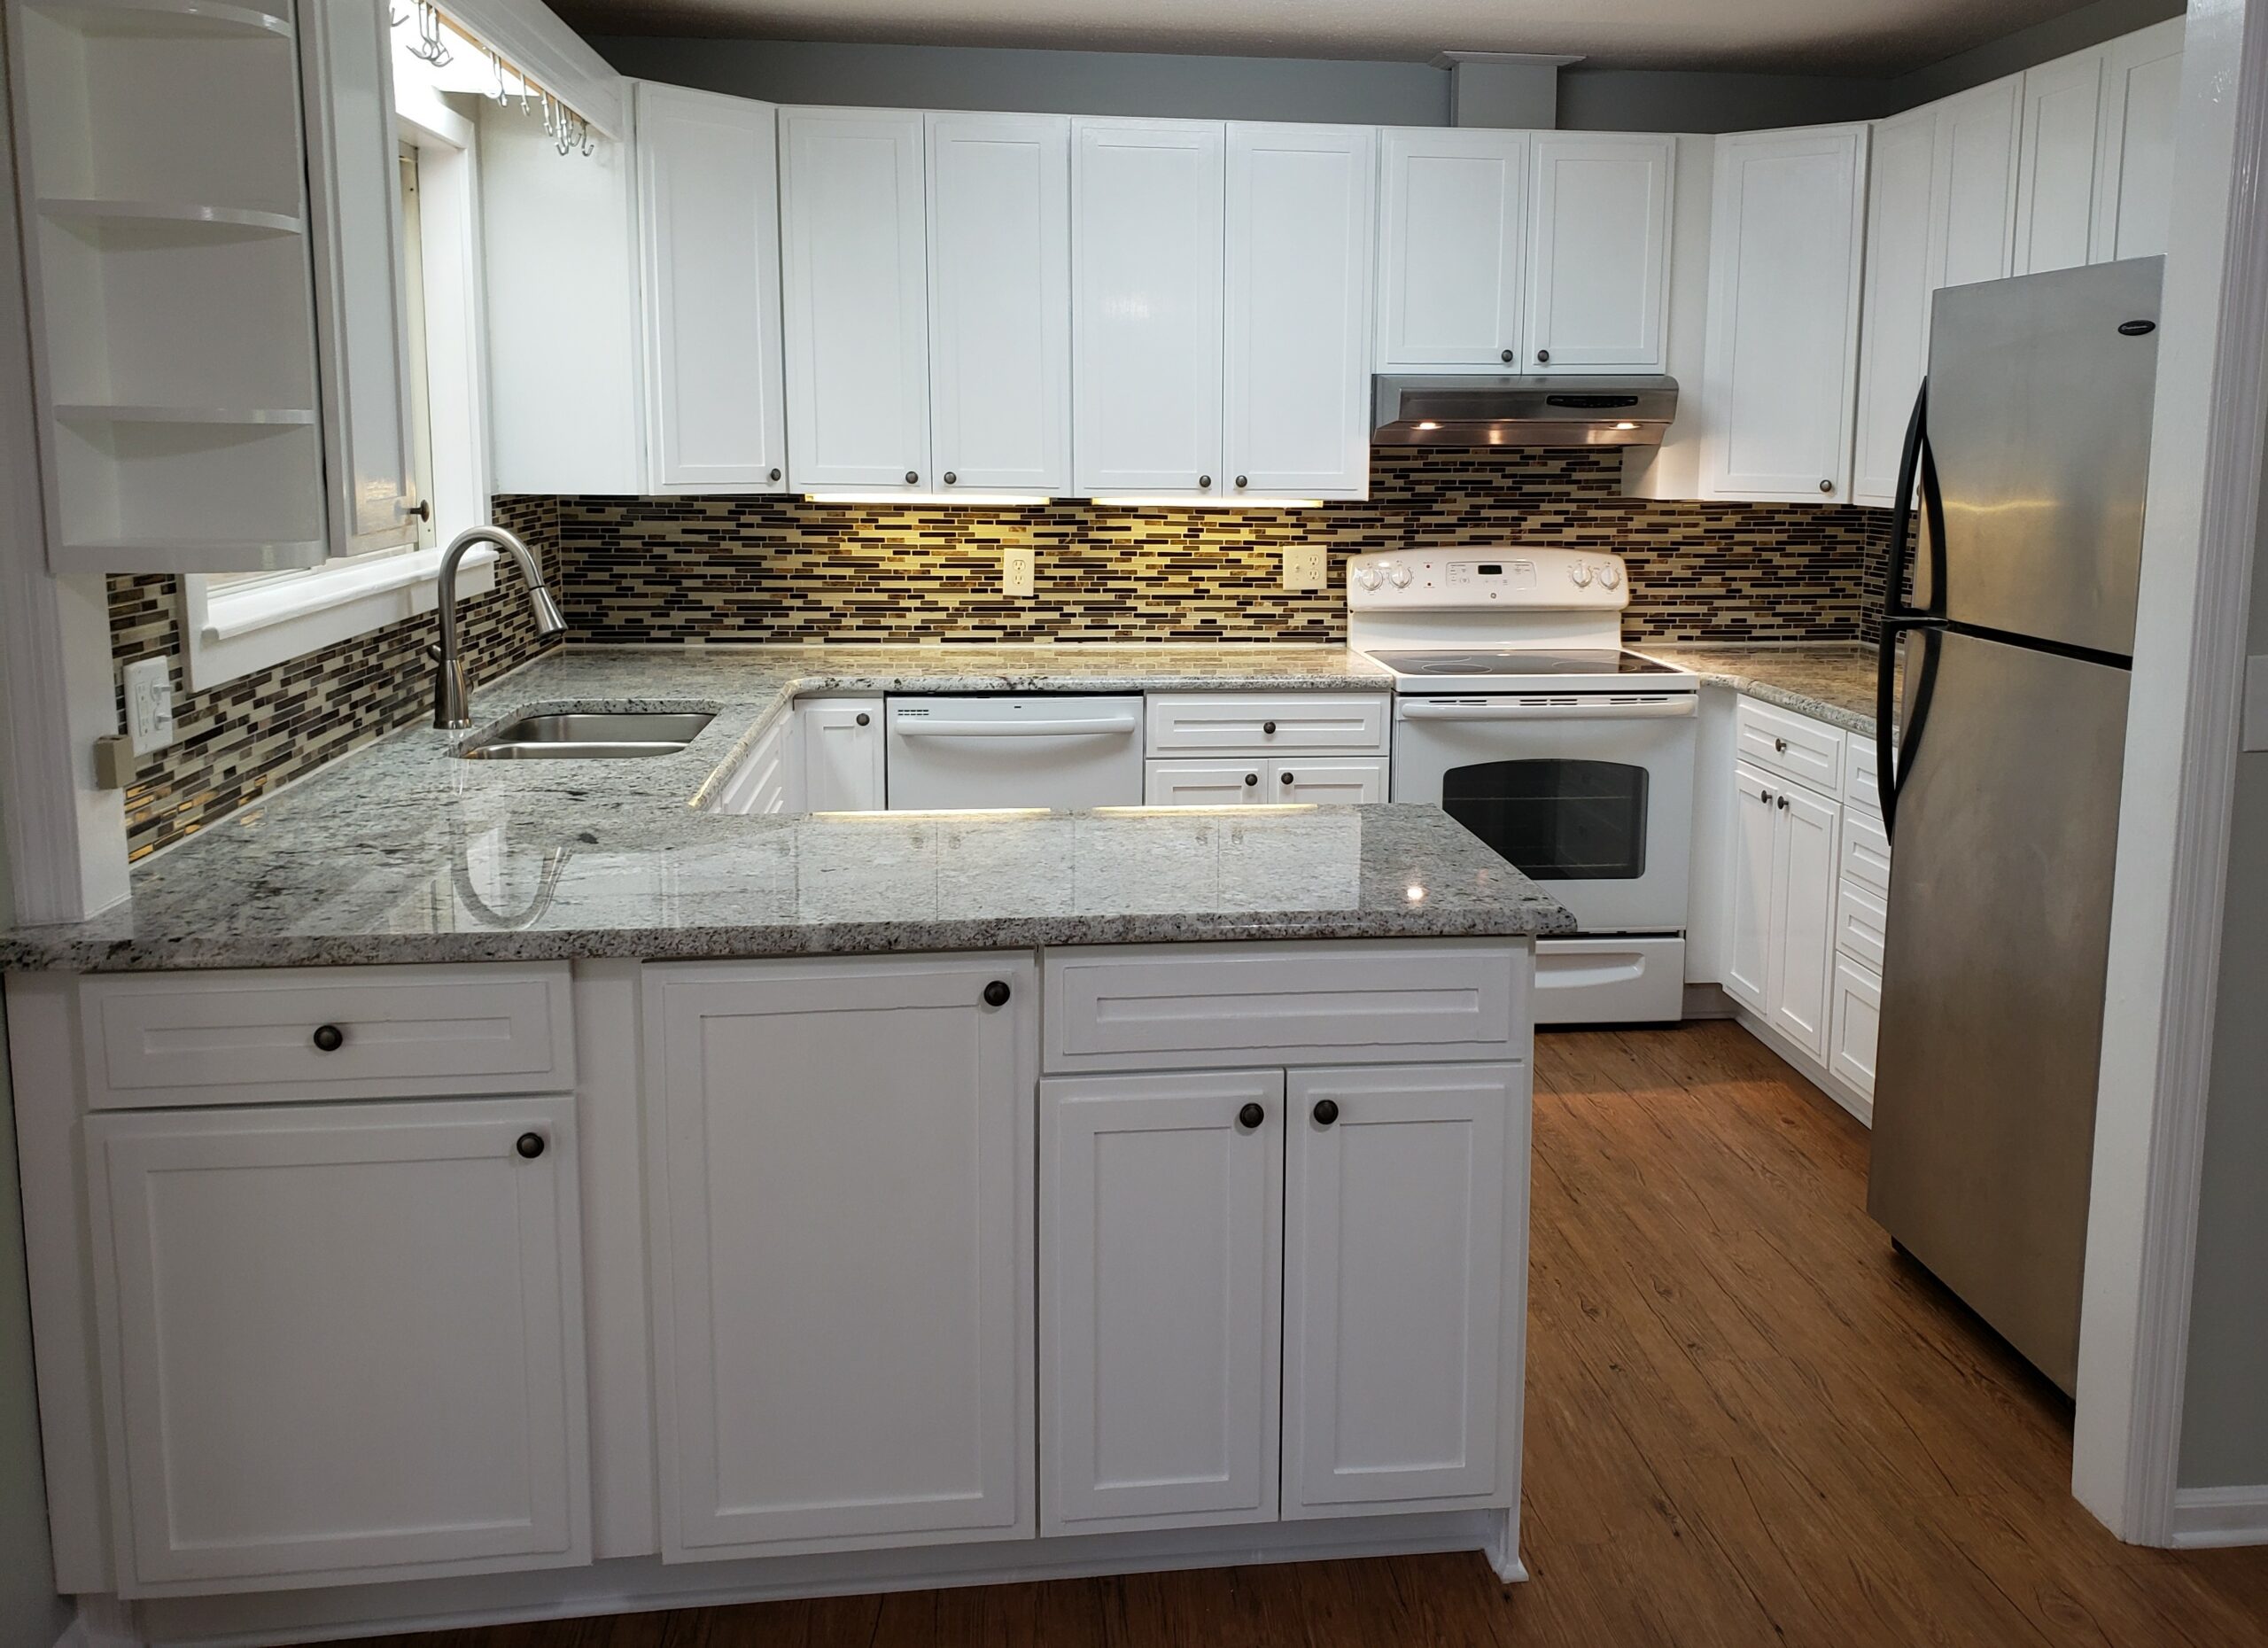 Prepare for showings by clearing any surface. This photos shows a kitchen with bare counters and all lights on. This is best staging you can give your kitchen counters.